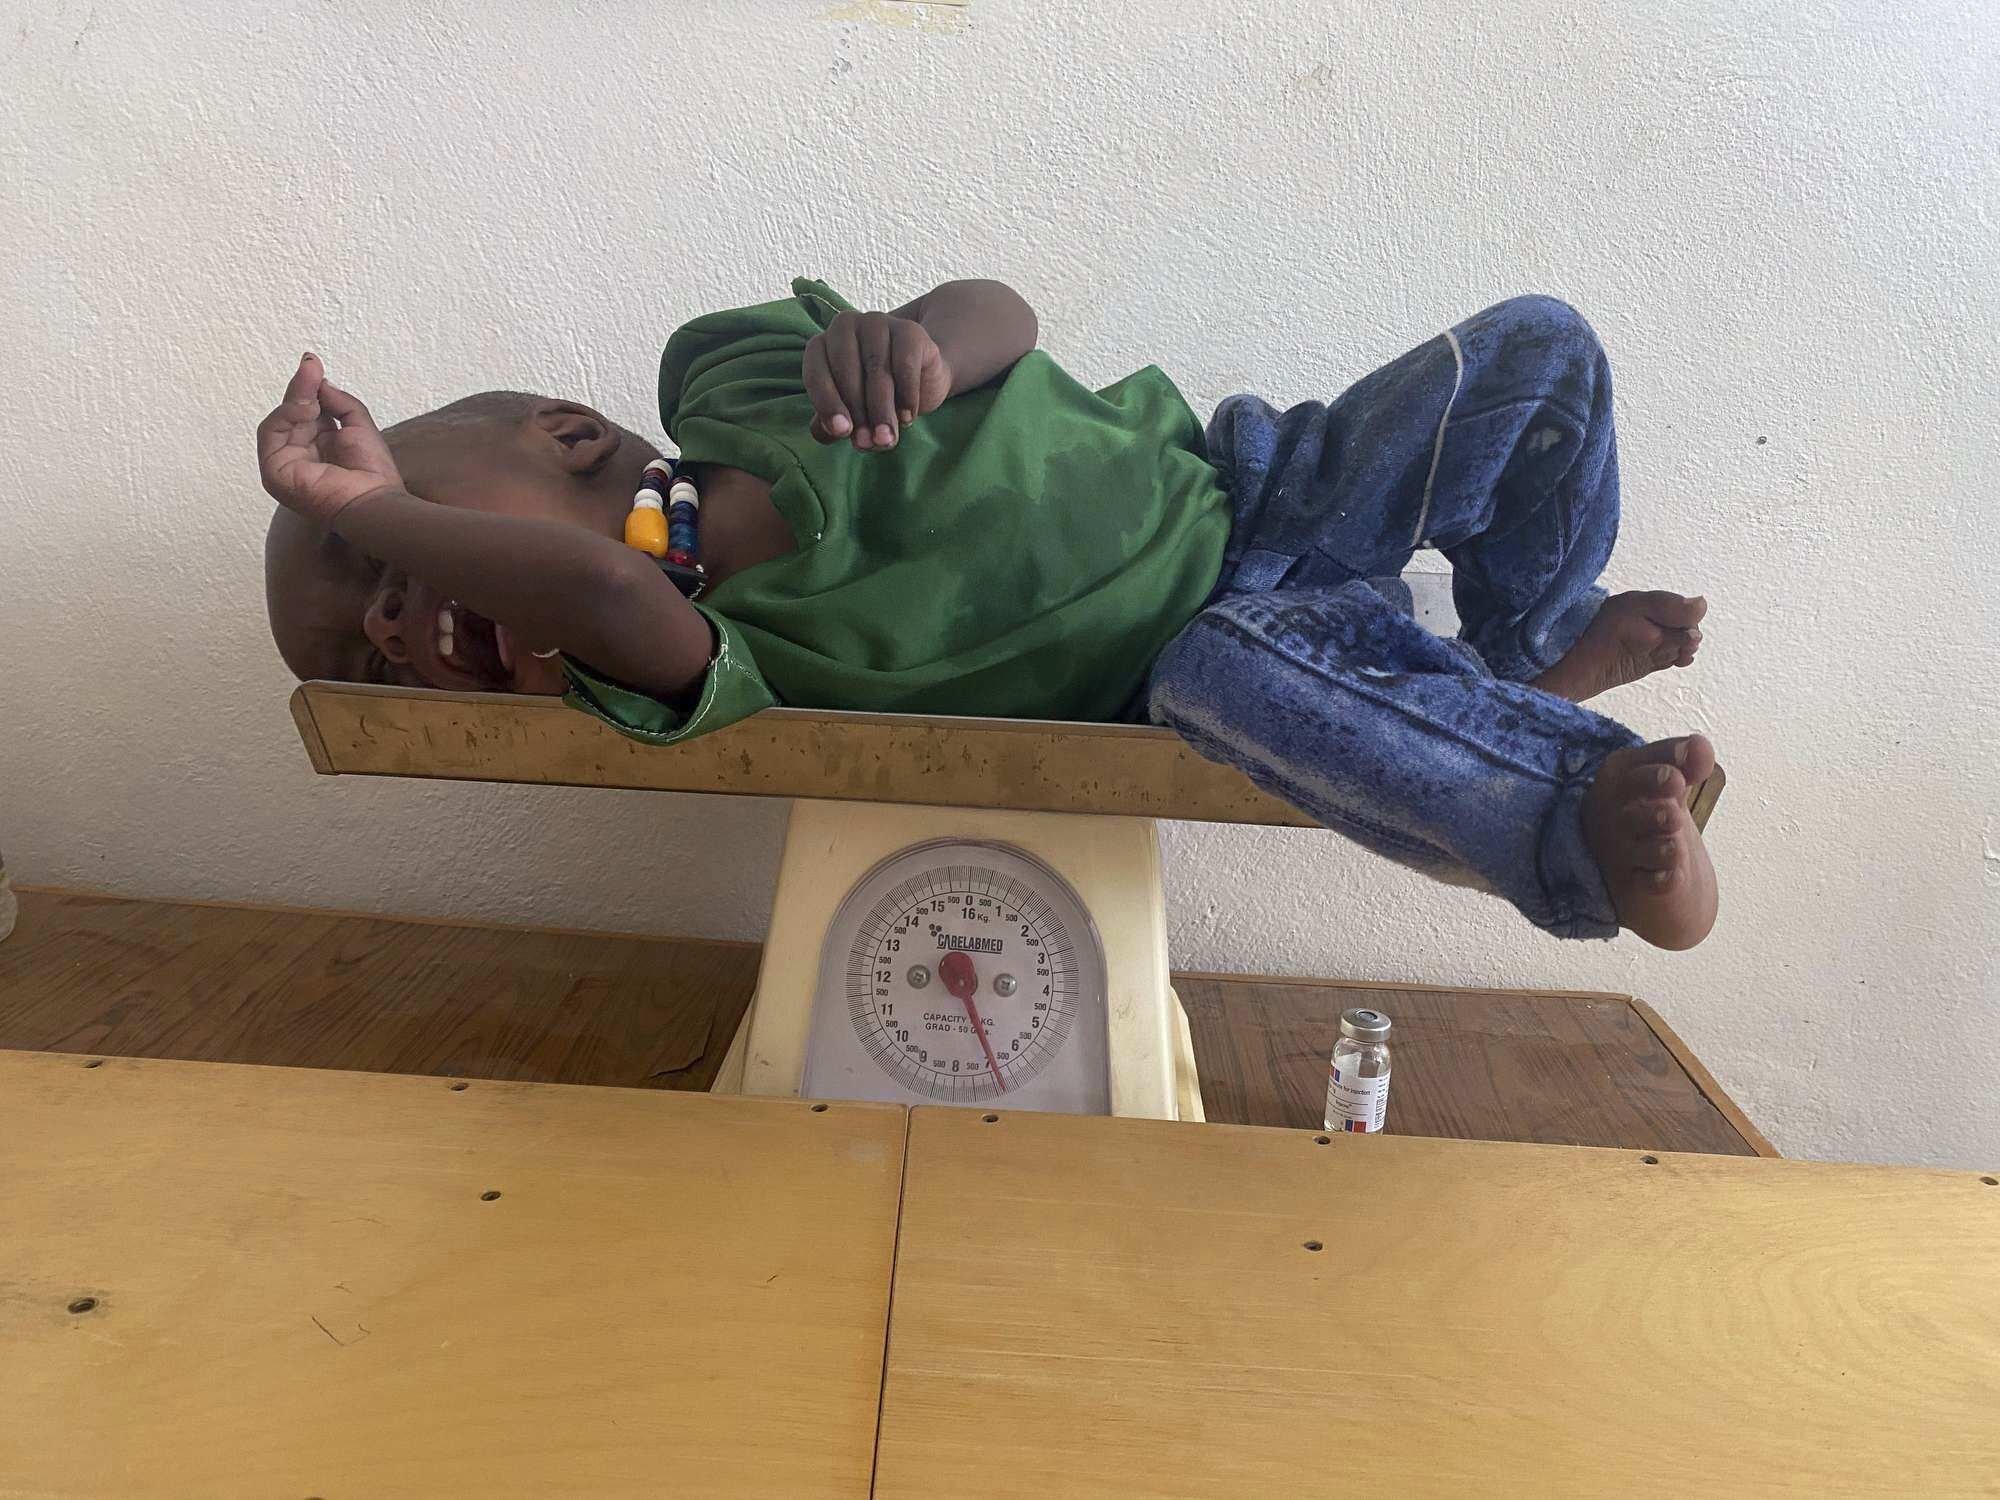 Amanuel Berhanu is weighed after being identified as severely malnourished, in the Wajirat district of the Tigray region, northern Ethiopia, July 19, 2021. (AP Photo)